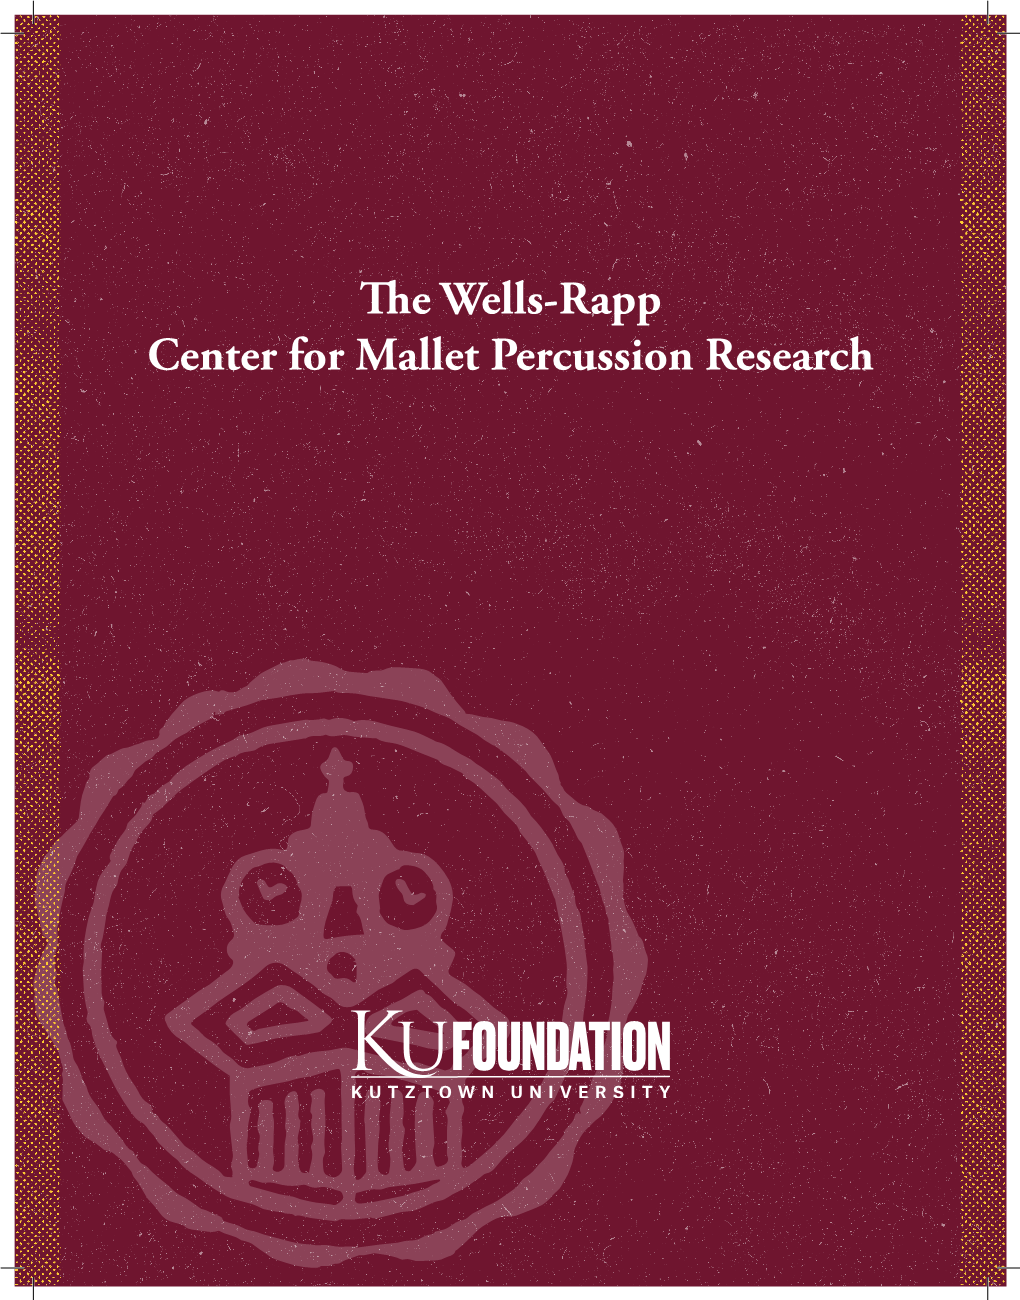 The Wells-Rapp Center for Mallet Percussion Research